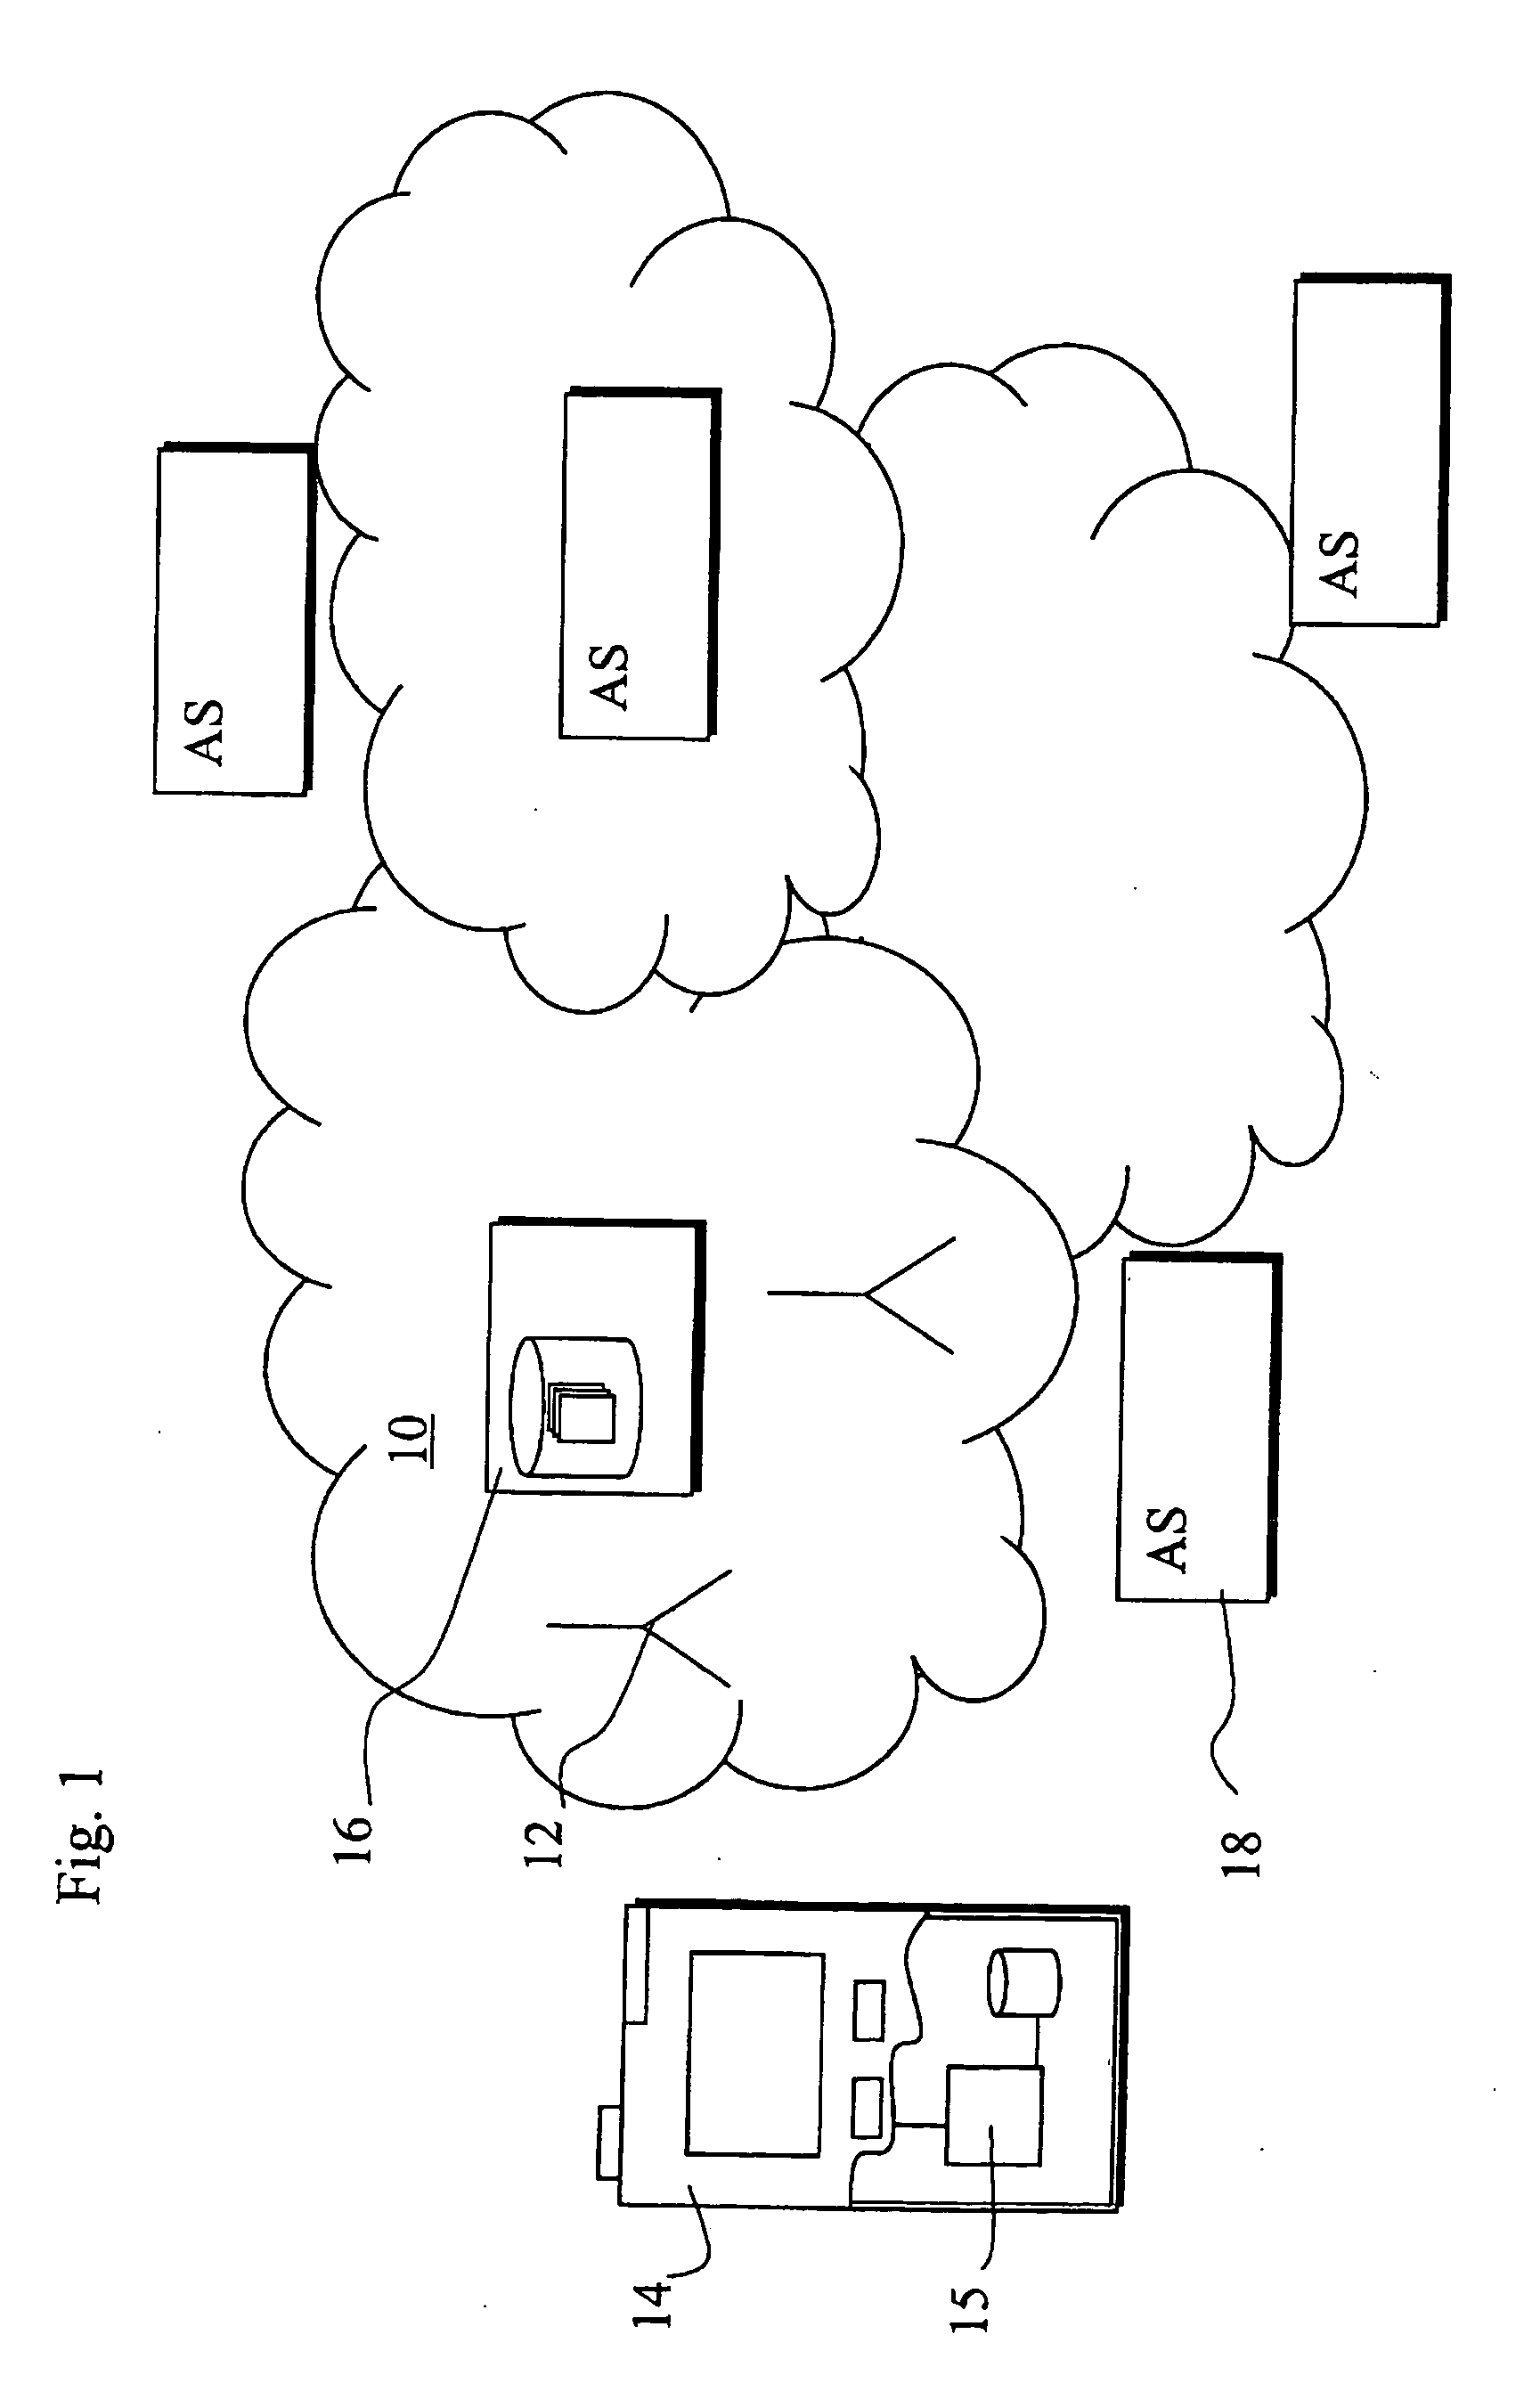 User authentication in a communications system